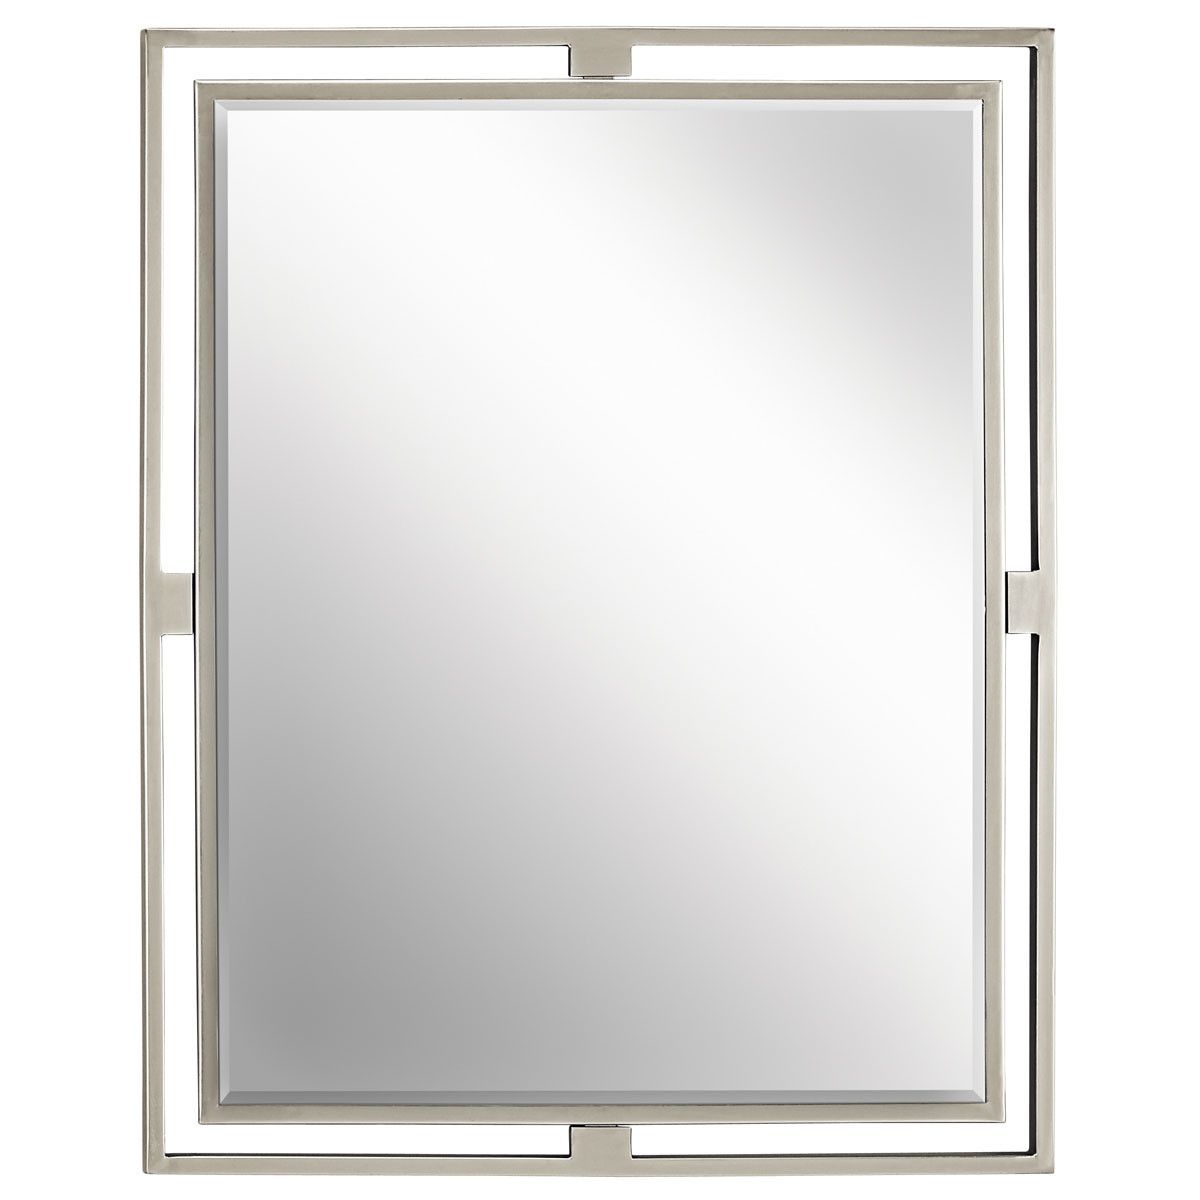 Kichler 41071 Brushed Nickel Hendrik Rectangle Beveled Framed Mirror With Regard To Oxidized Nickel Wall Mirrors (View 2 of 15)